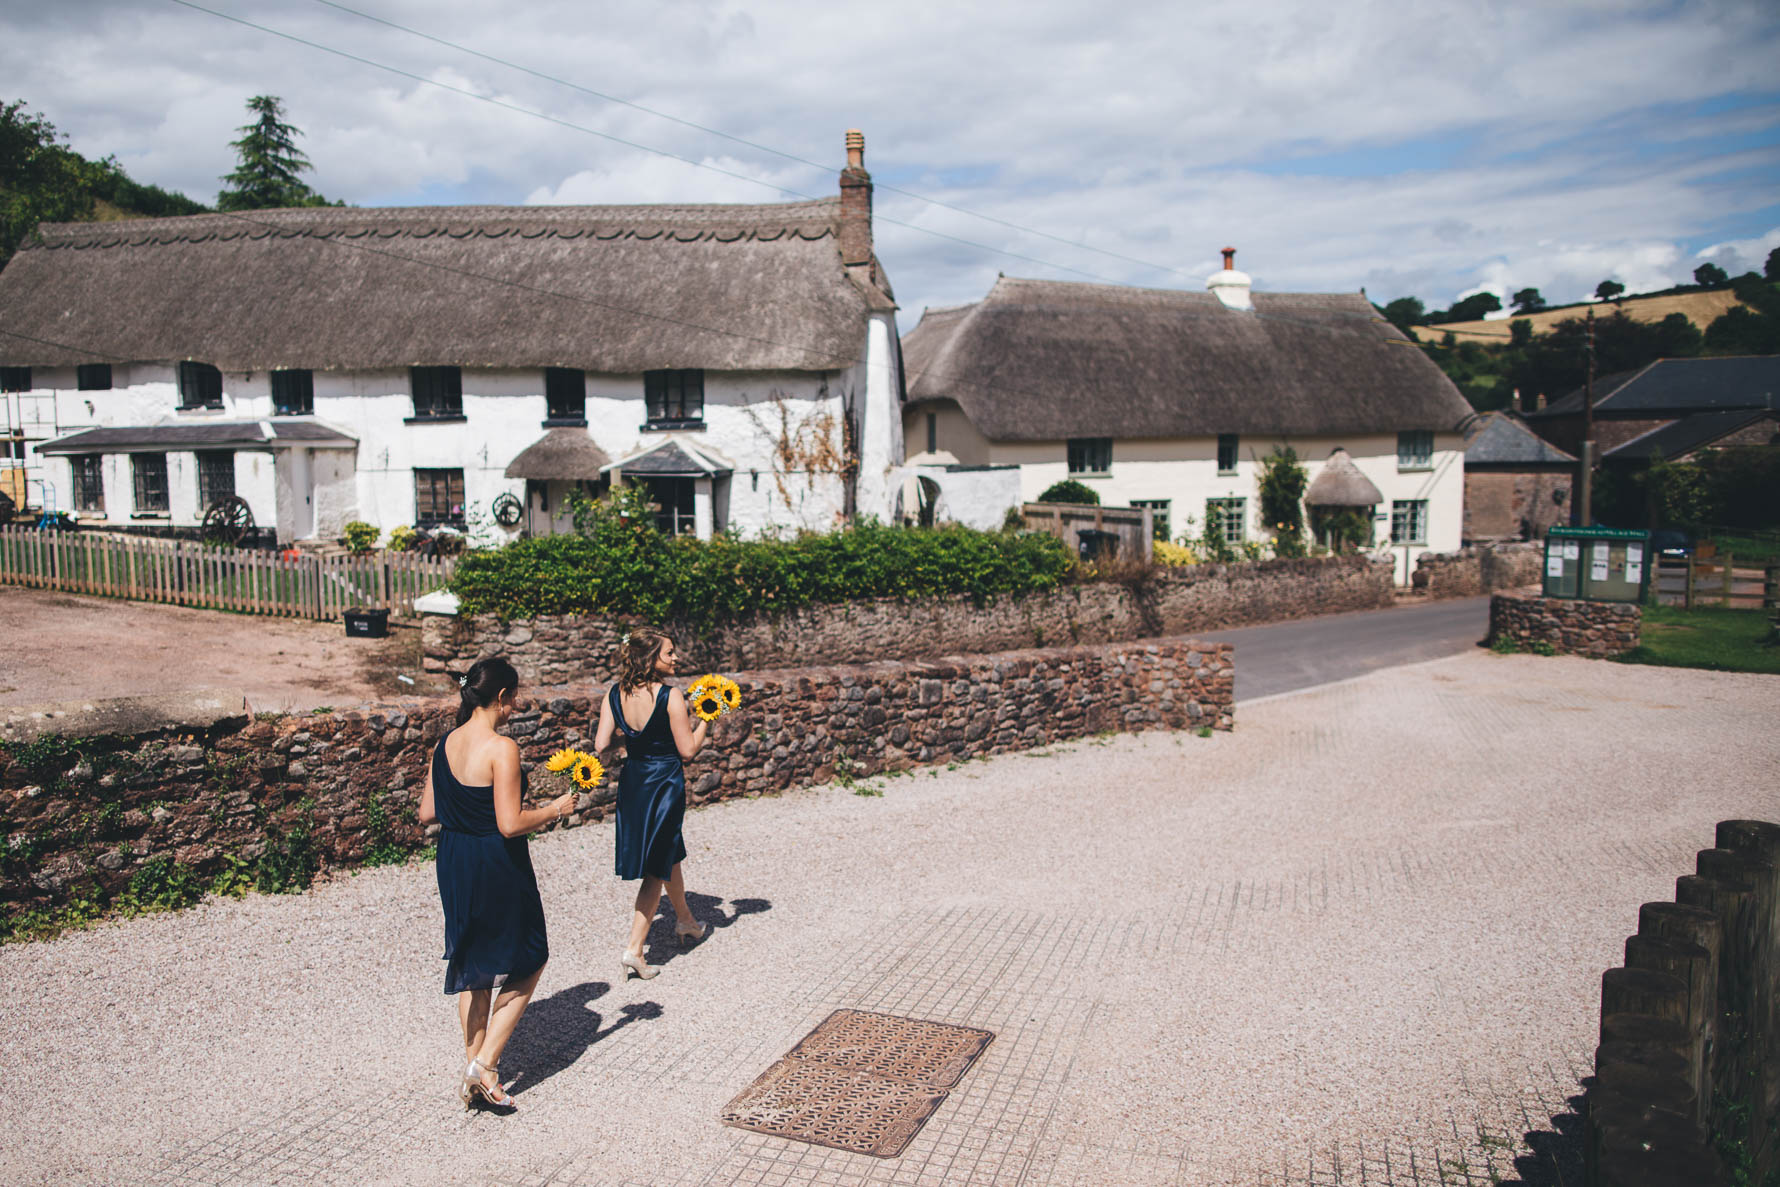 Two bridesmaids in midnight blue dresses holding sunflowers walking in front of two large whitewashed thatched cottages in a village in Devon.